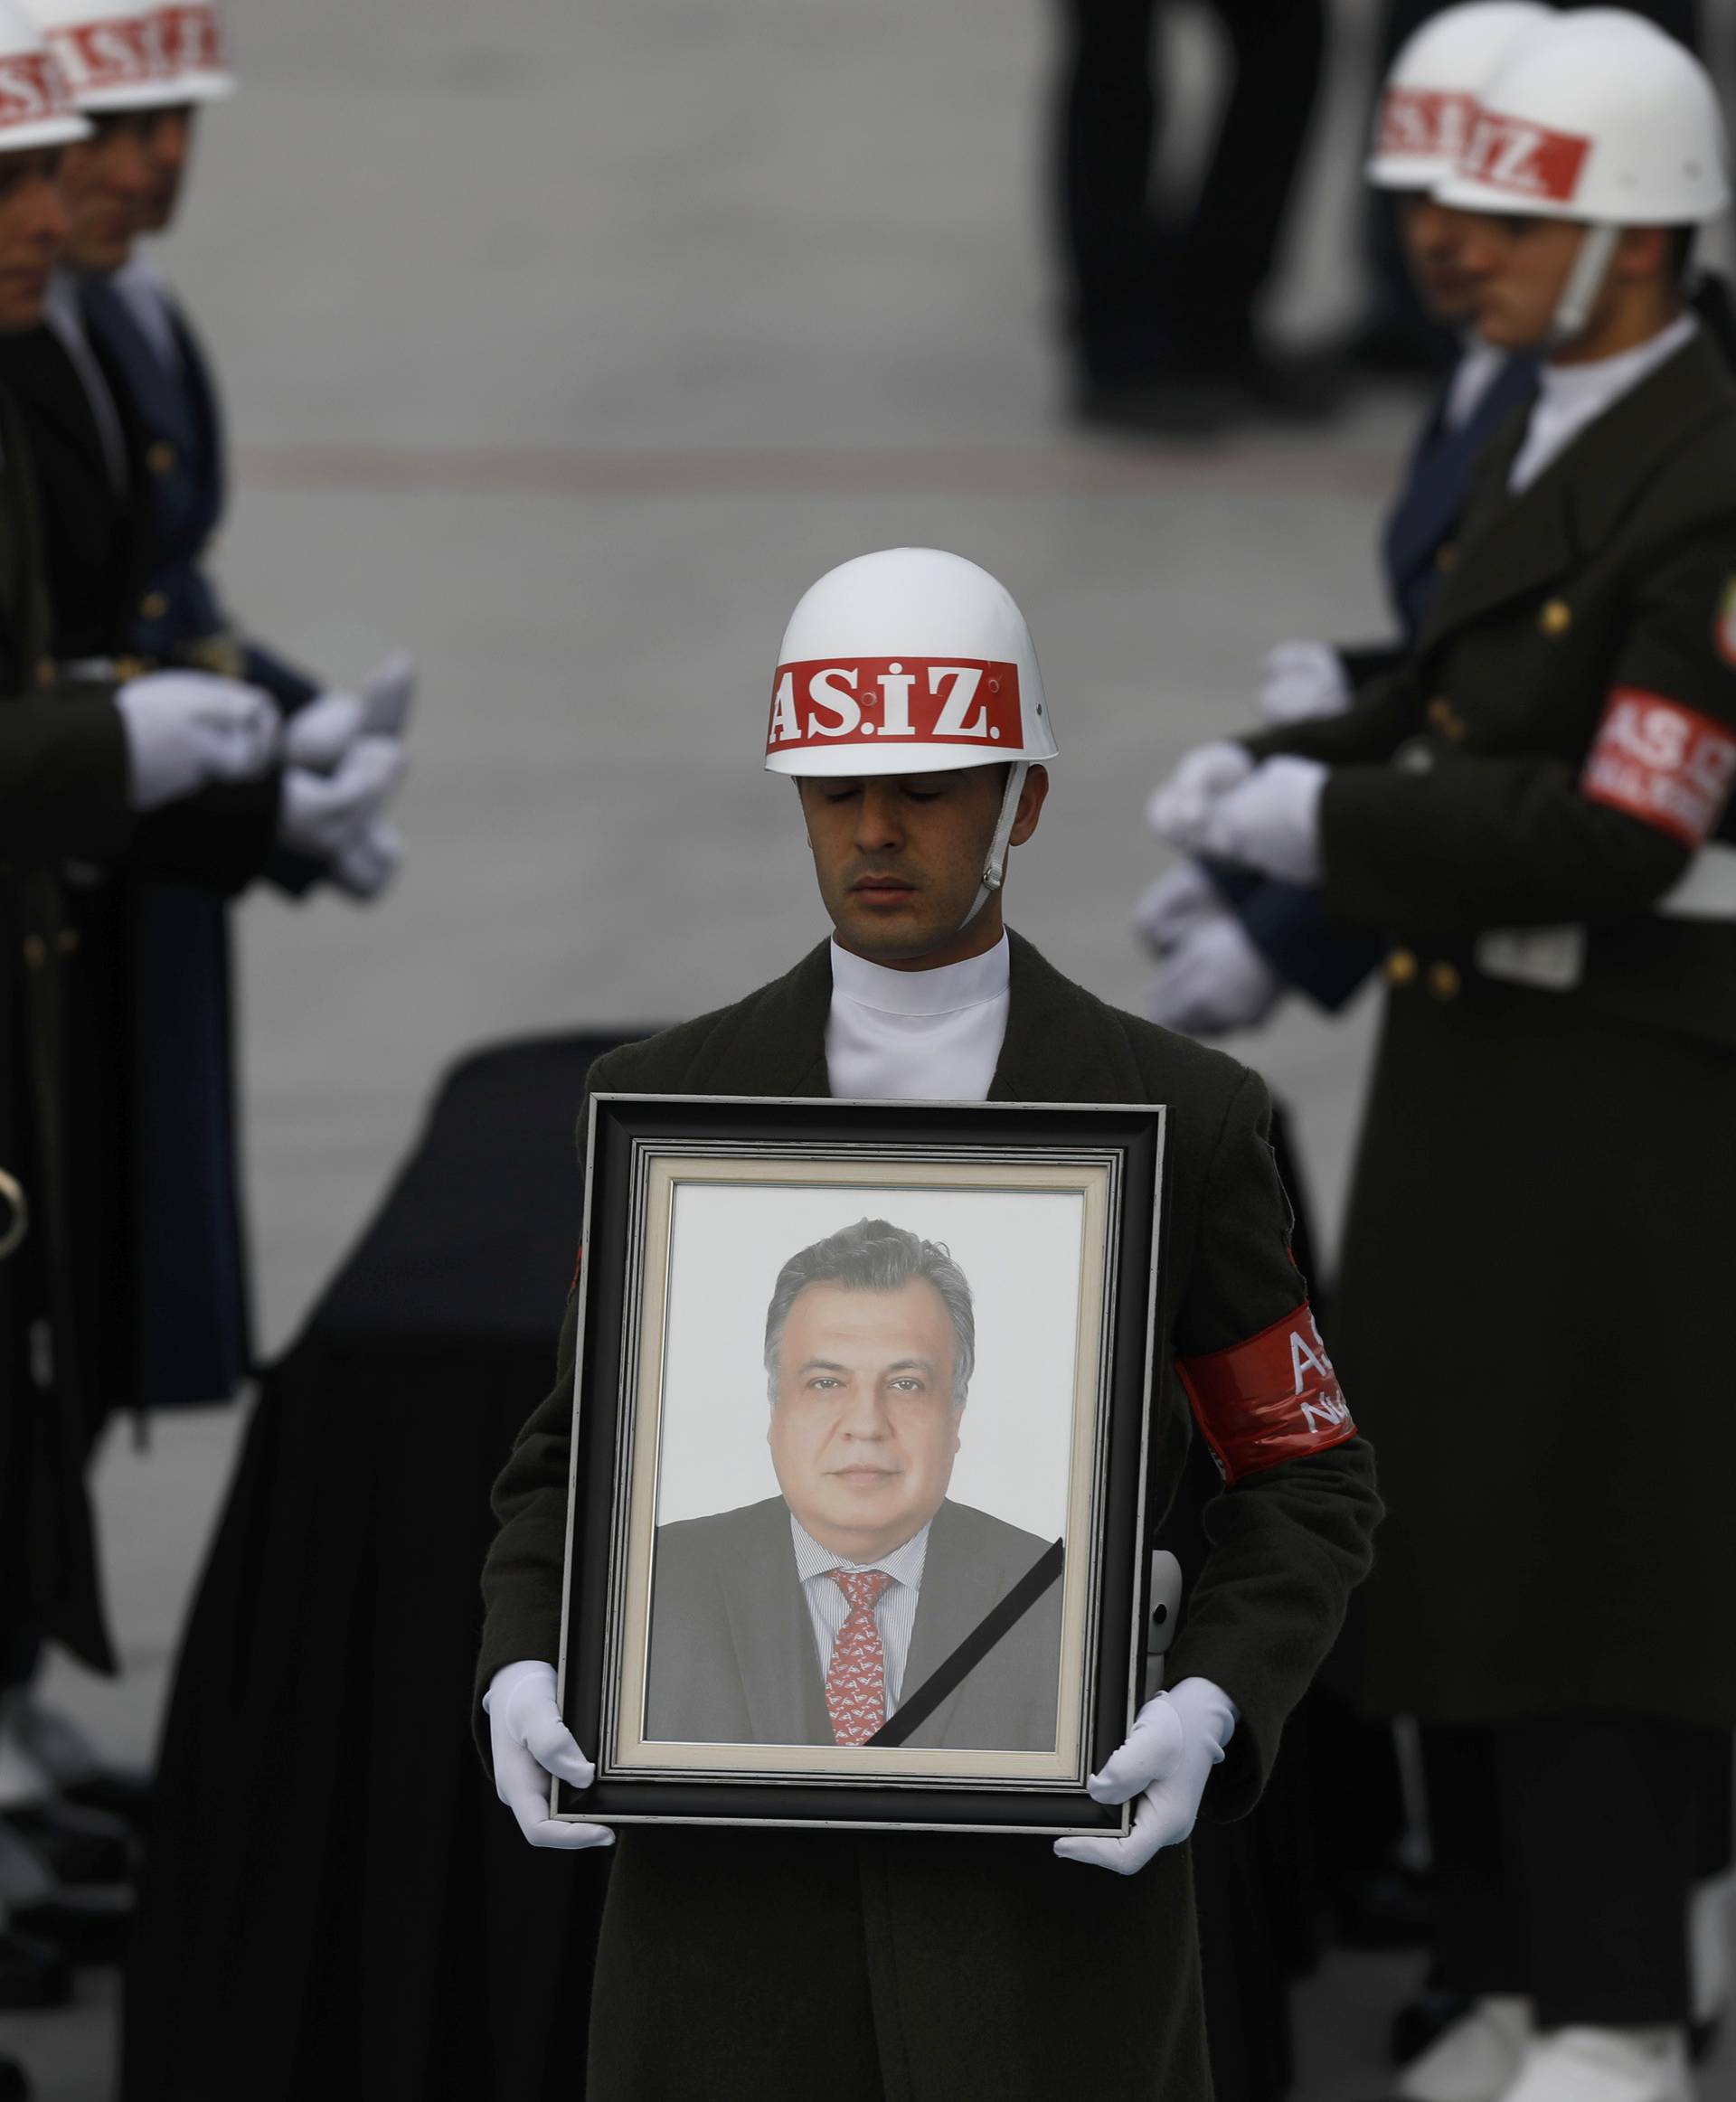 Honor guard holds a picture of late Russian Ambassador to Turkey Karlov during a ceremony at Esenboga airport in Ankara